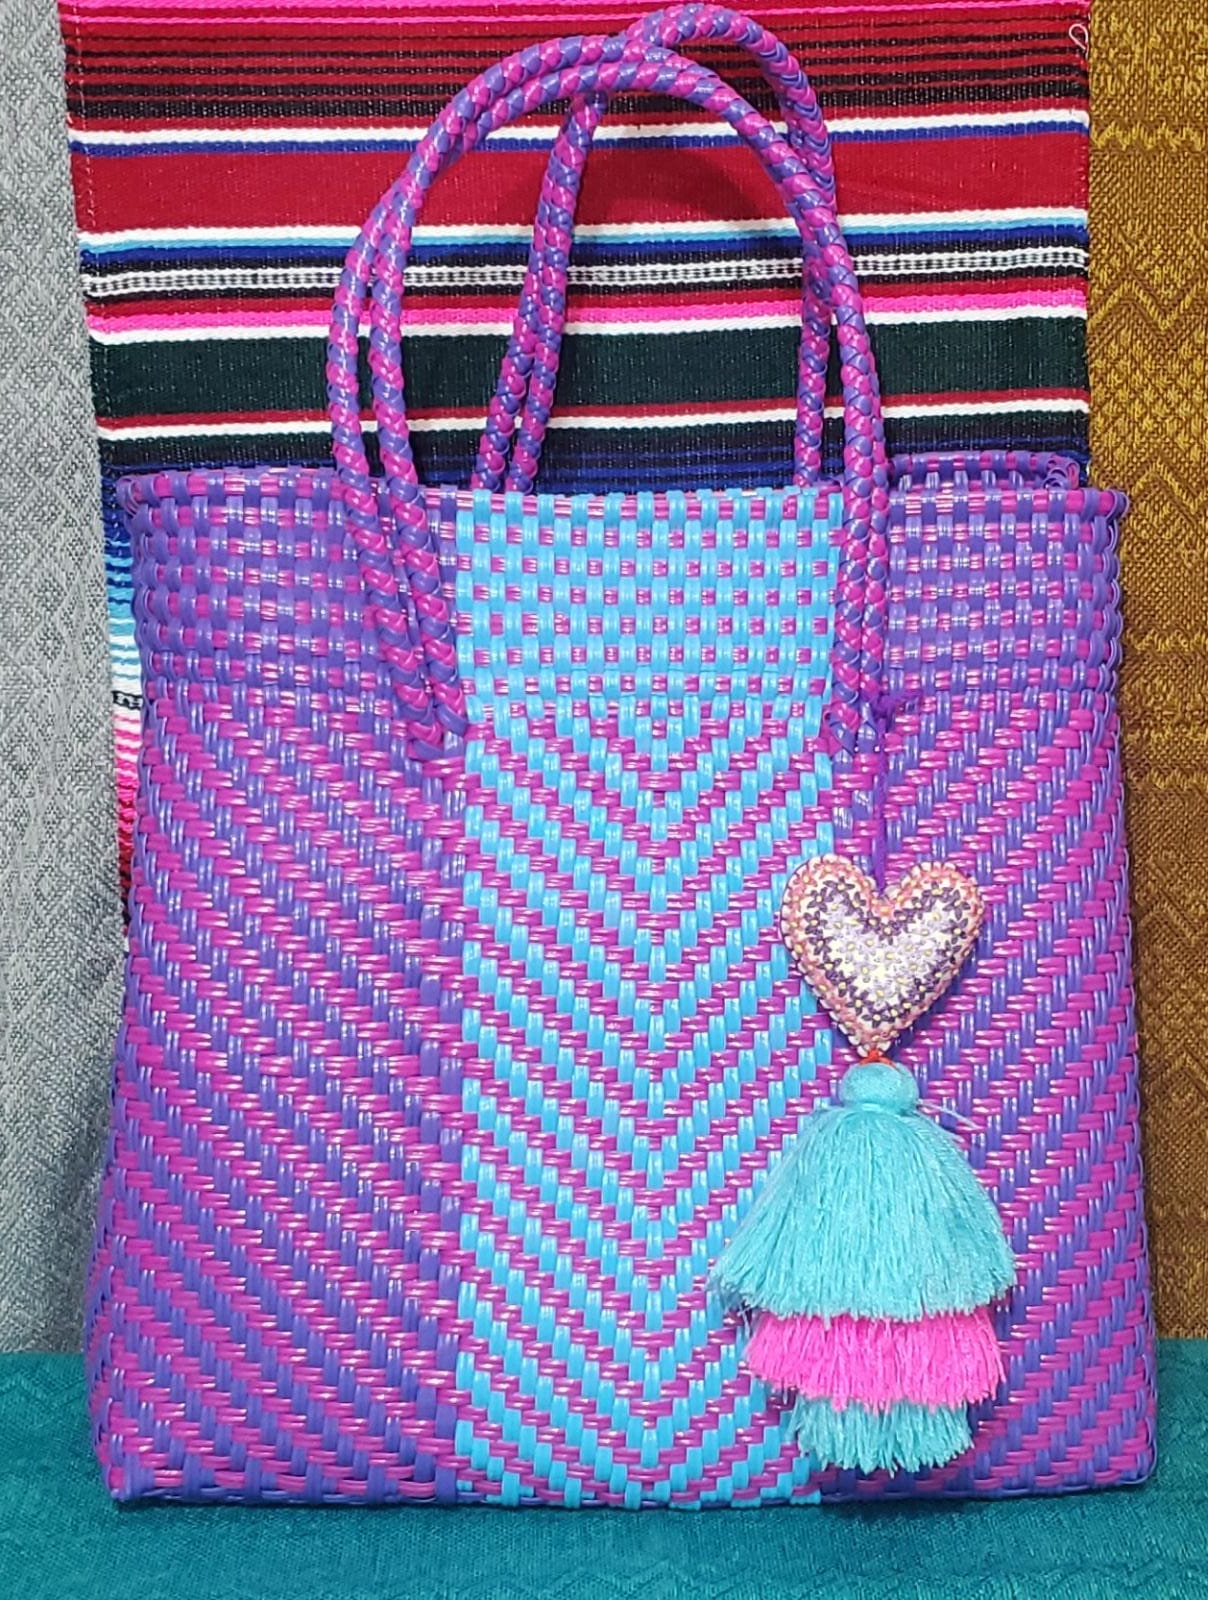 The art of crochet & weaving to up-cycle trash plastic bags into accessories